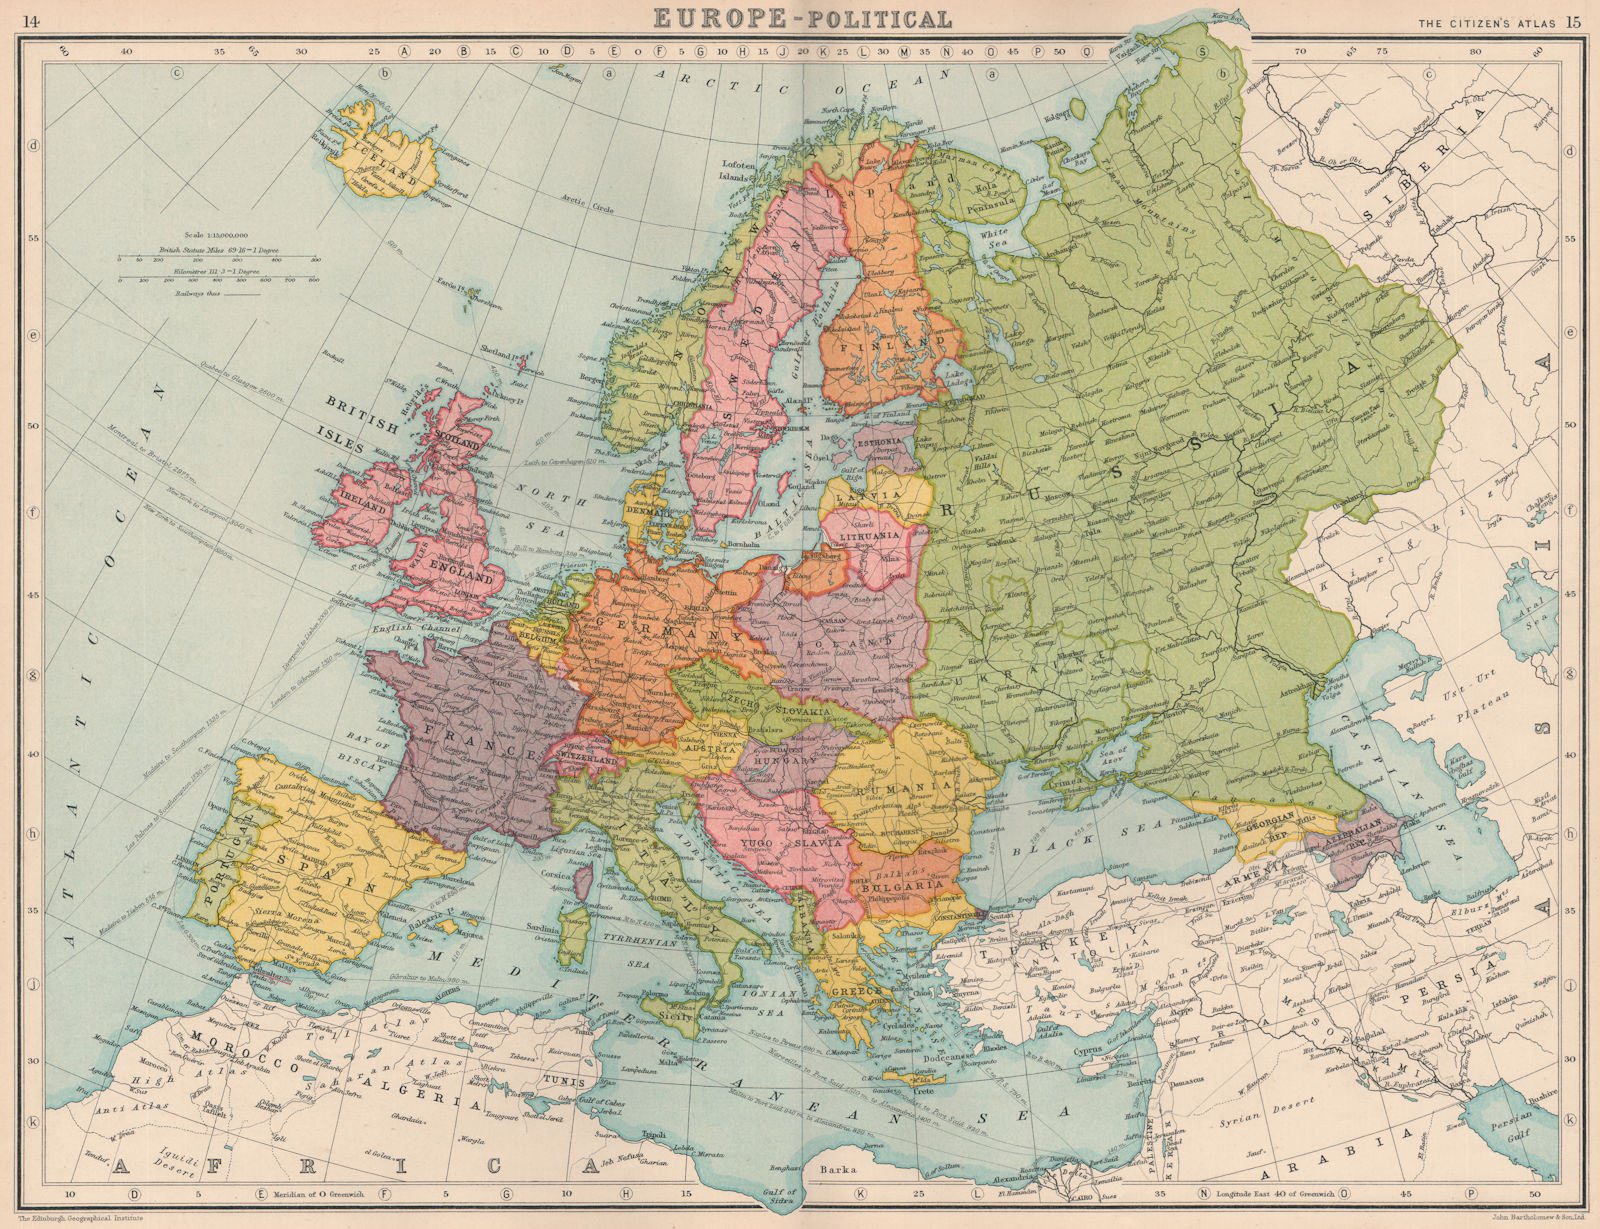 EUROPE-POLITICAL. Shows Saar under League of Nations administration 1924 map